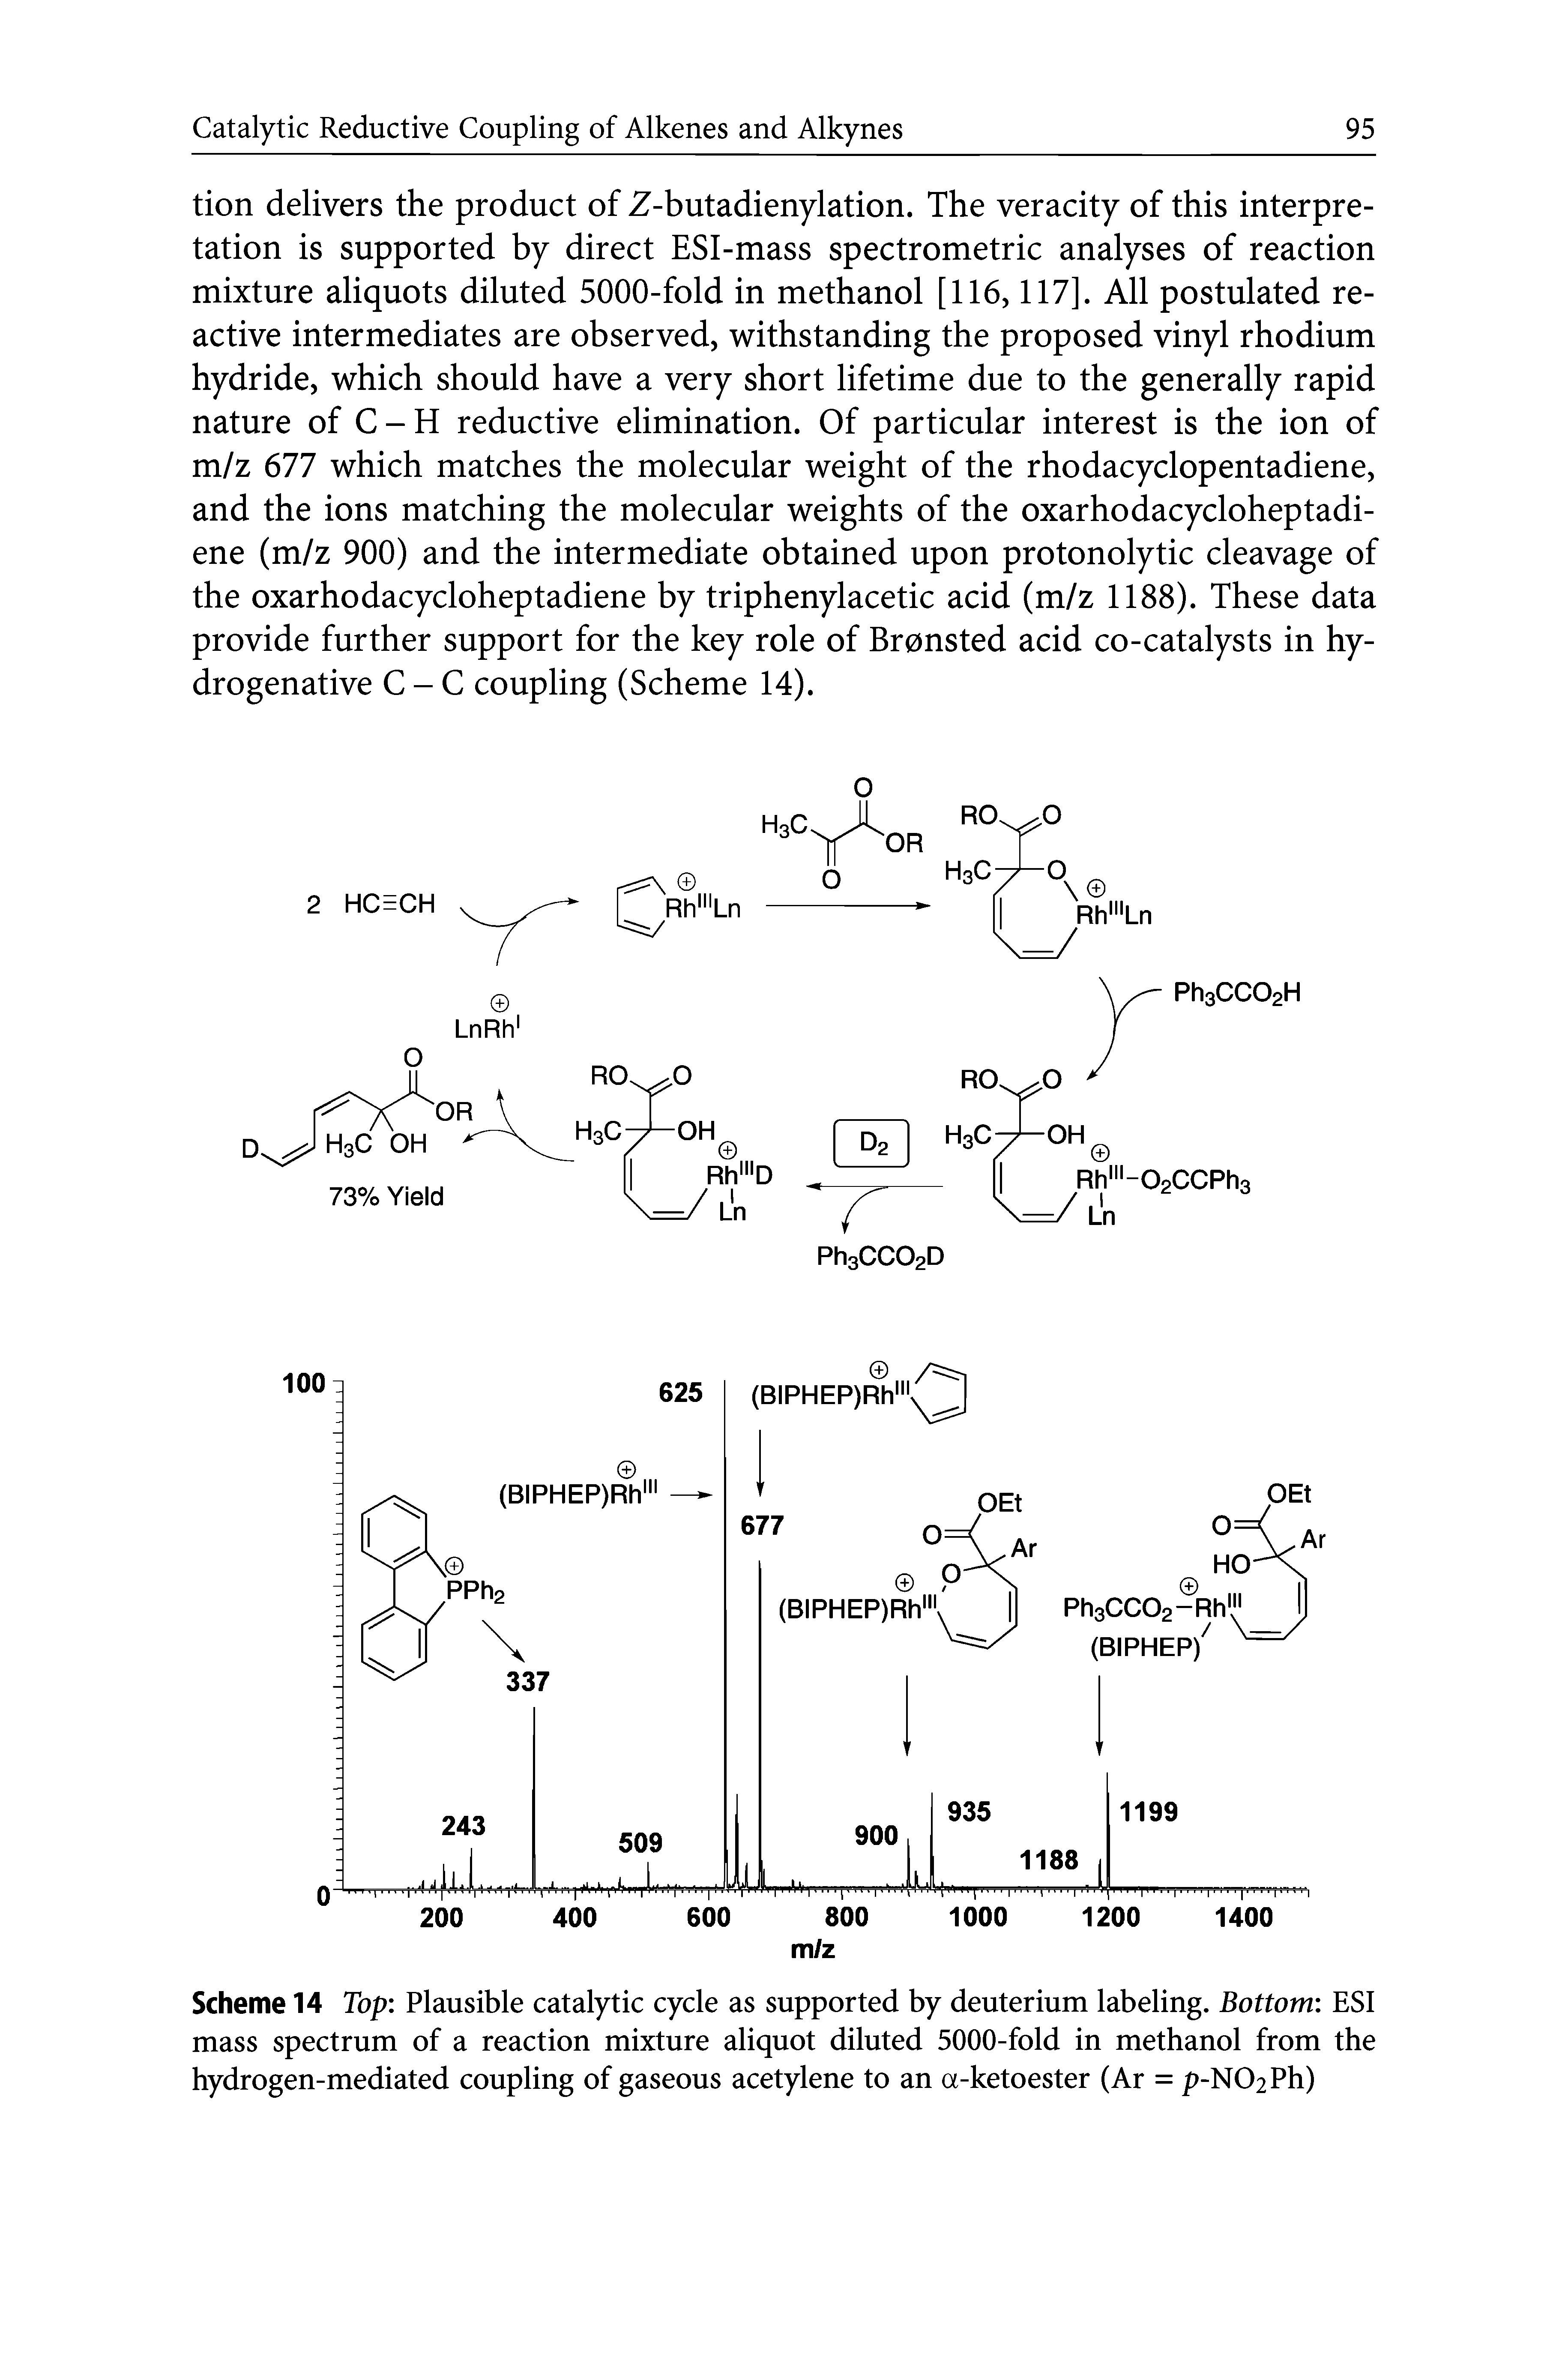 Scheme 14 Top Plausible catalytic cycle as supported by deuterium labeling. Bottom ESI mass spectrum of a reaction mixture aliquot diluted 5000-fold in methanol from the hydrogen-mediated coupling of gaseous acetylene to an a-ketoester (Ar = p-N02Ph)...